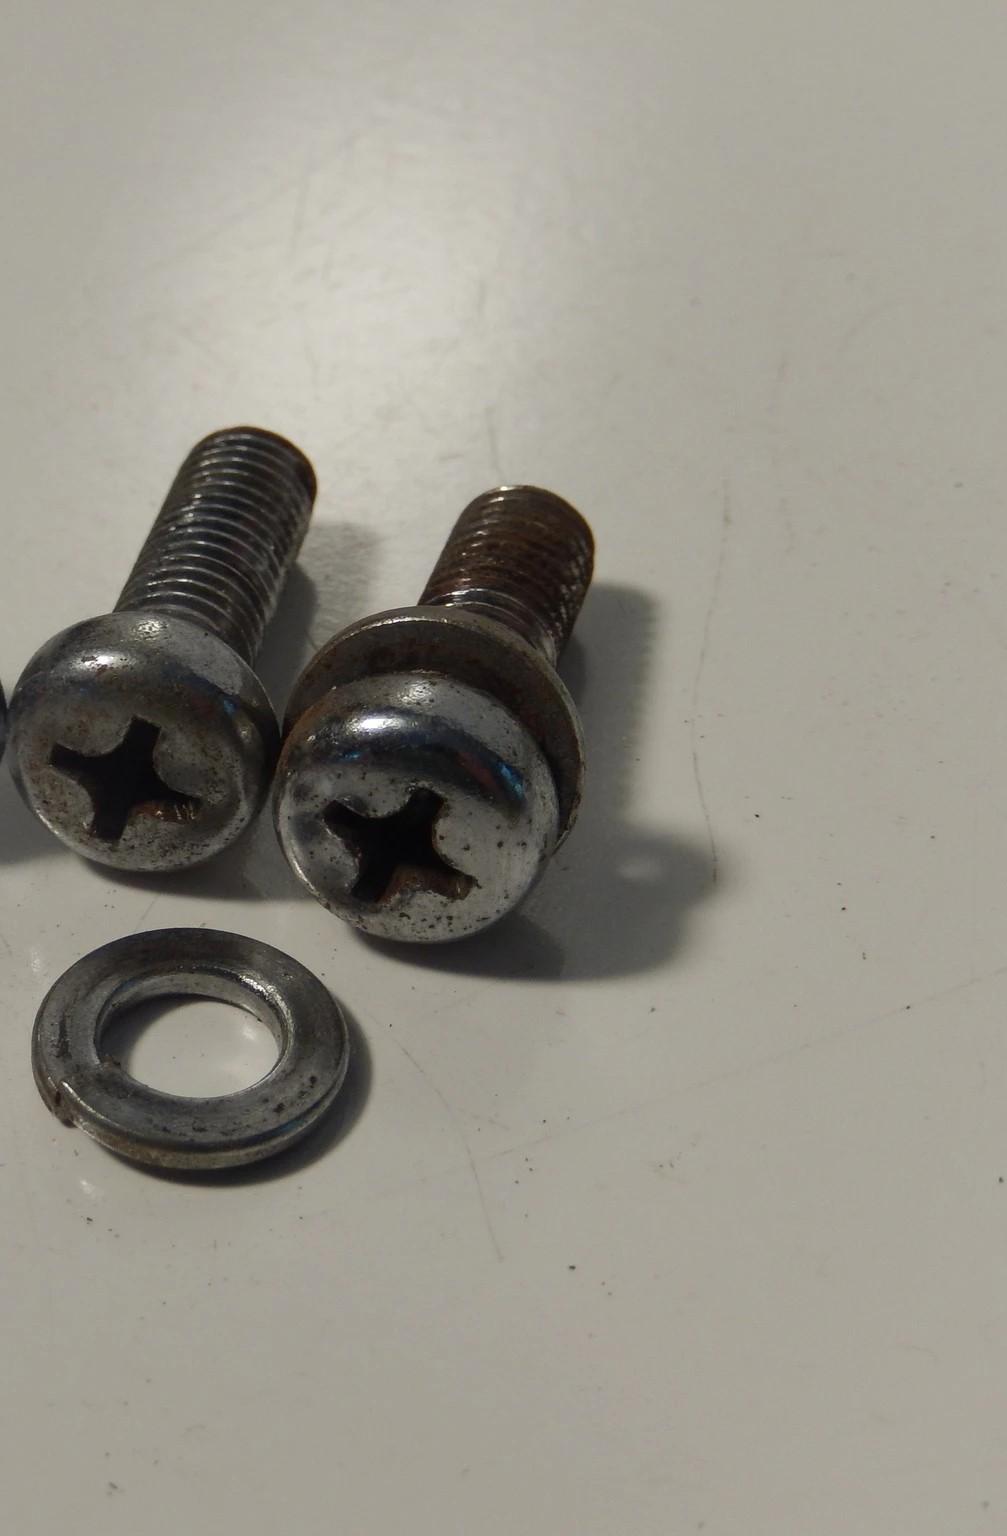 Seat screws and washers